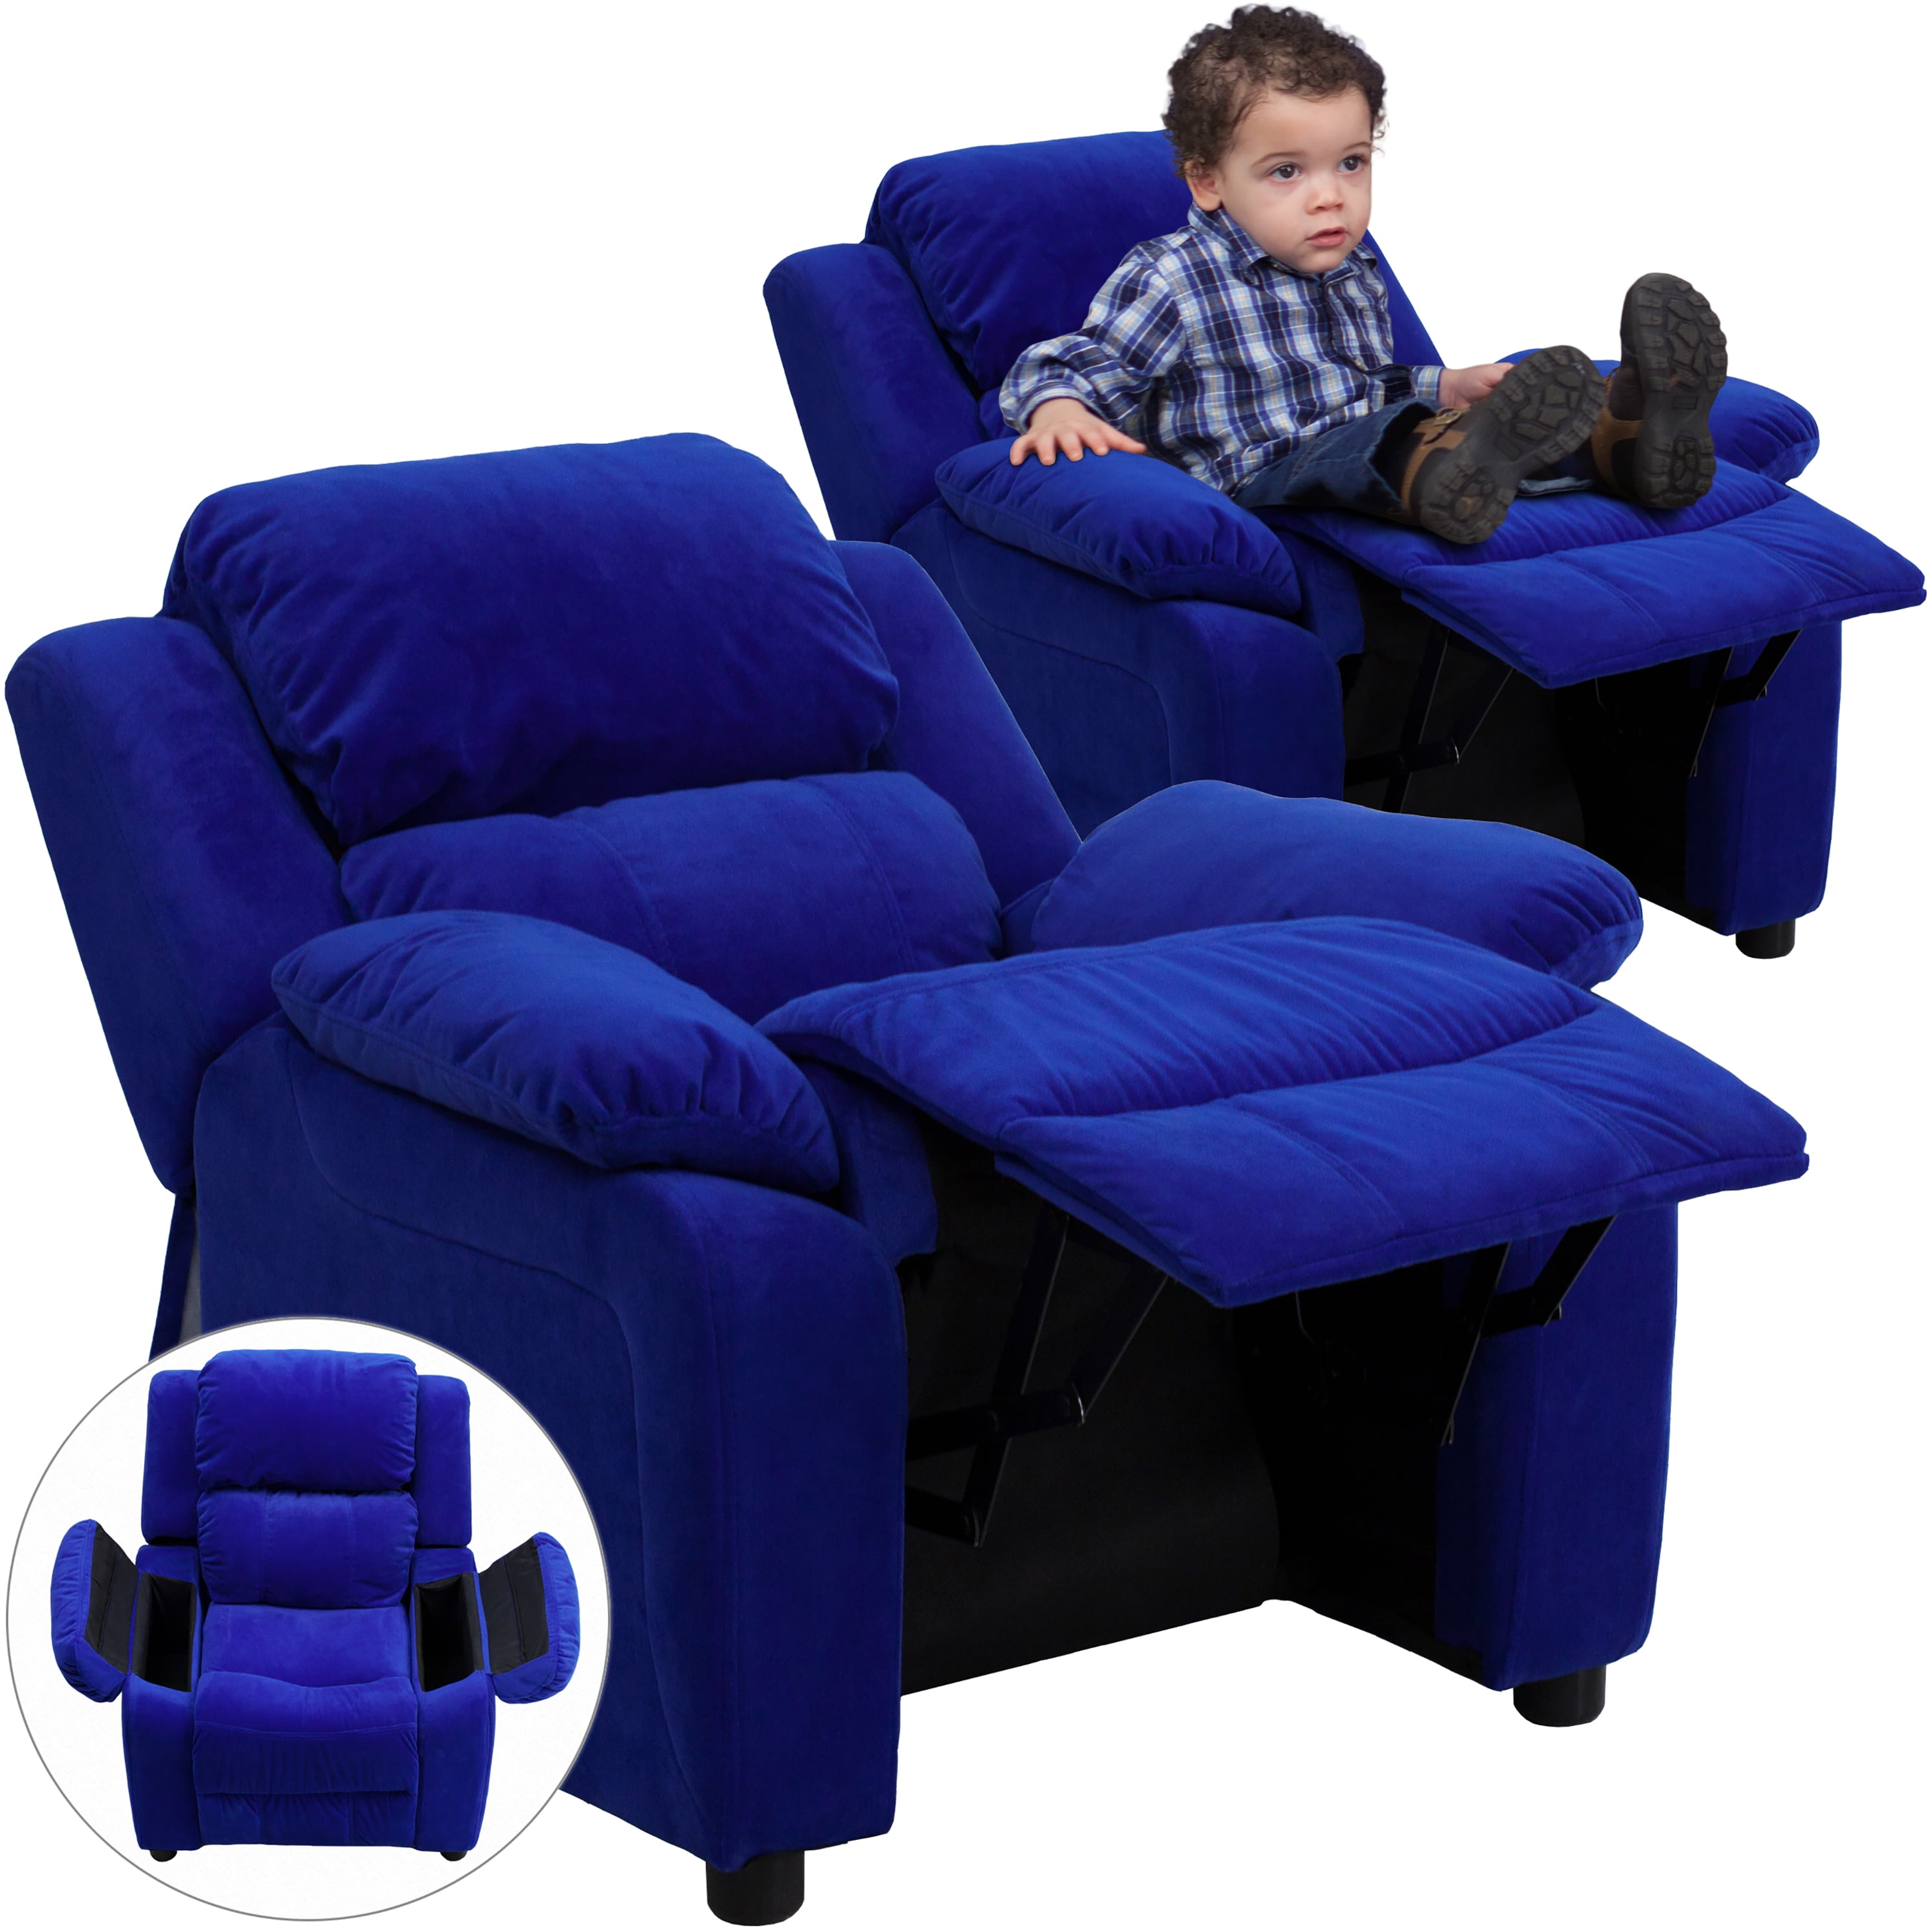 Flash Furniture Deluxe Padded Contemporary Blue Microfiber Kids Recliner with Storage Arms - image 3 of 13